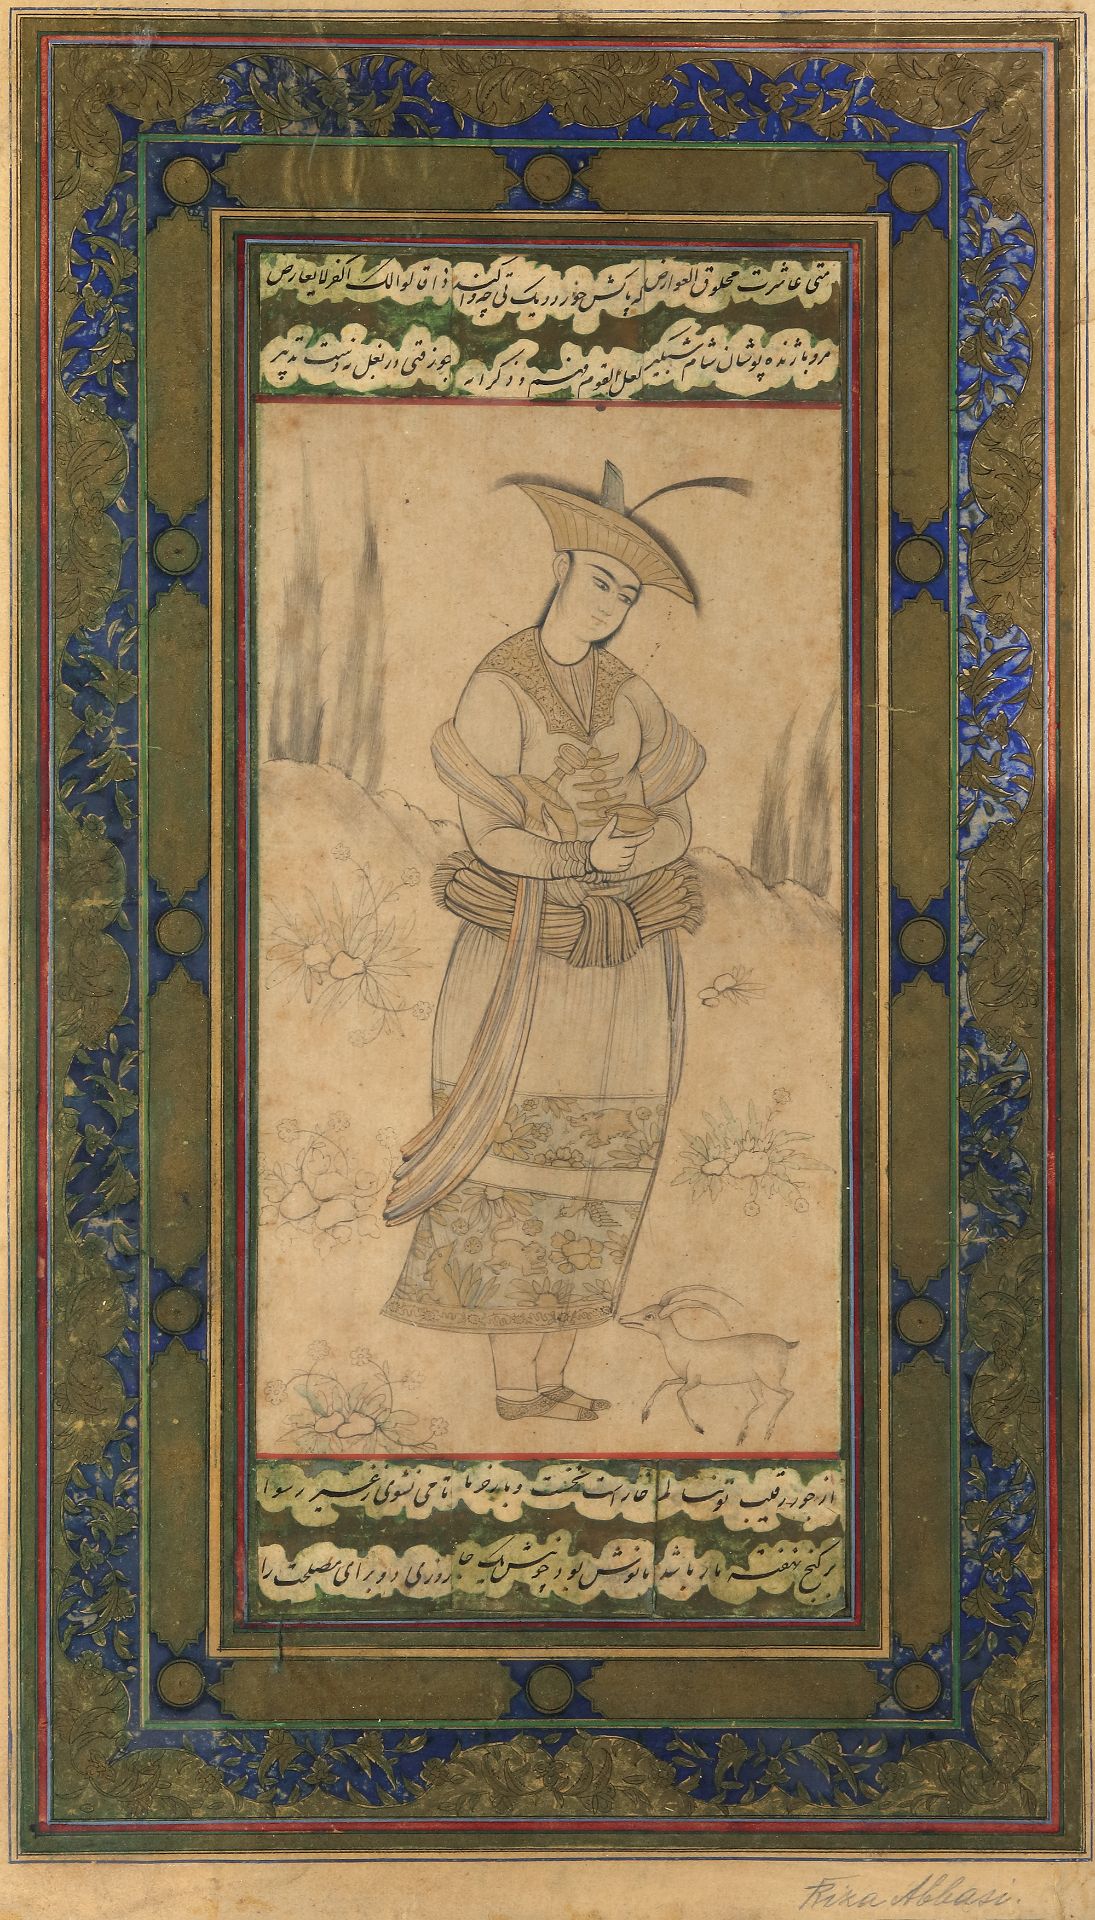 A WANDERING YOUTH, PERSIA QAJAR, SAFAVID STYLE, EARLY 19TH CENTURY